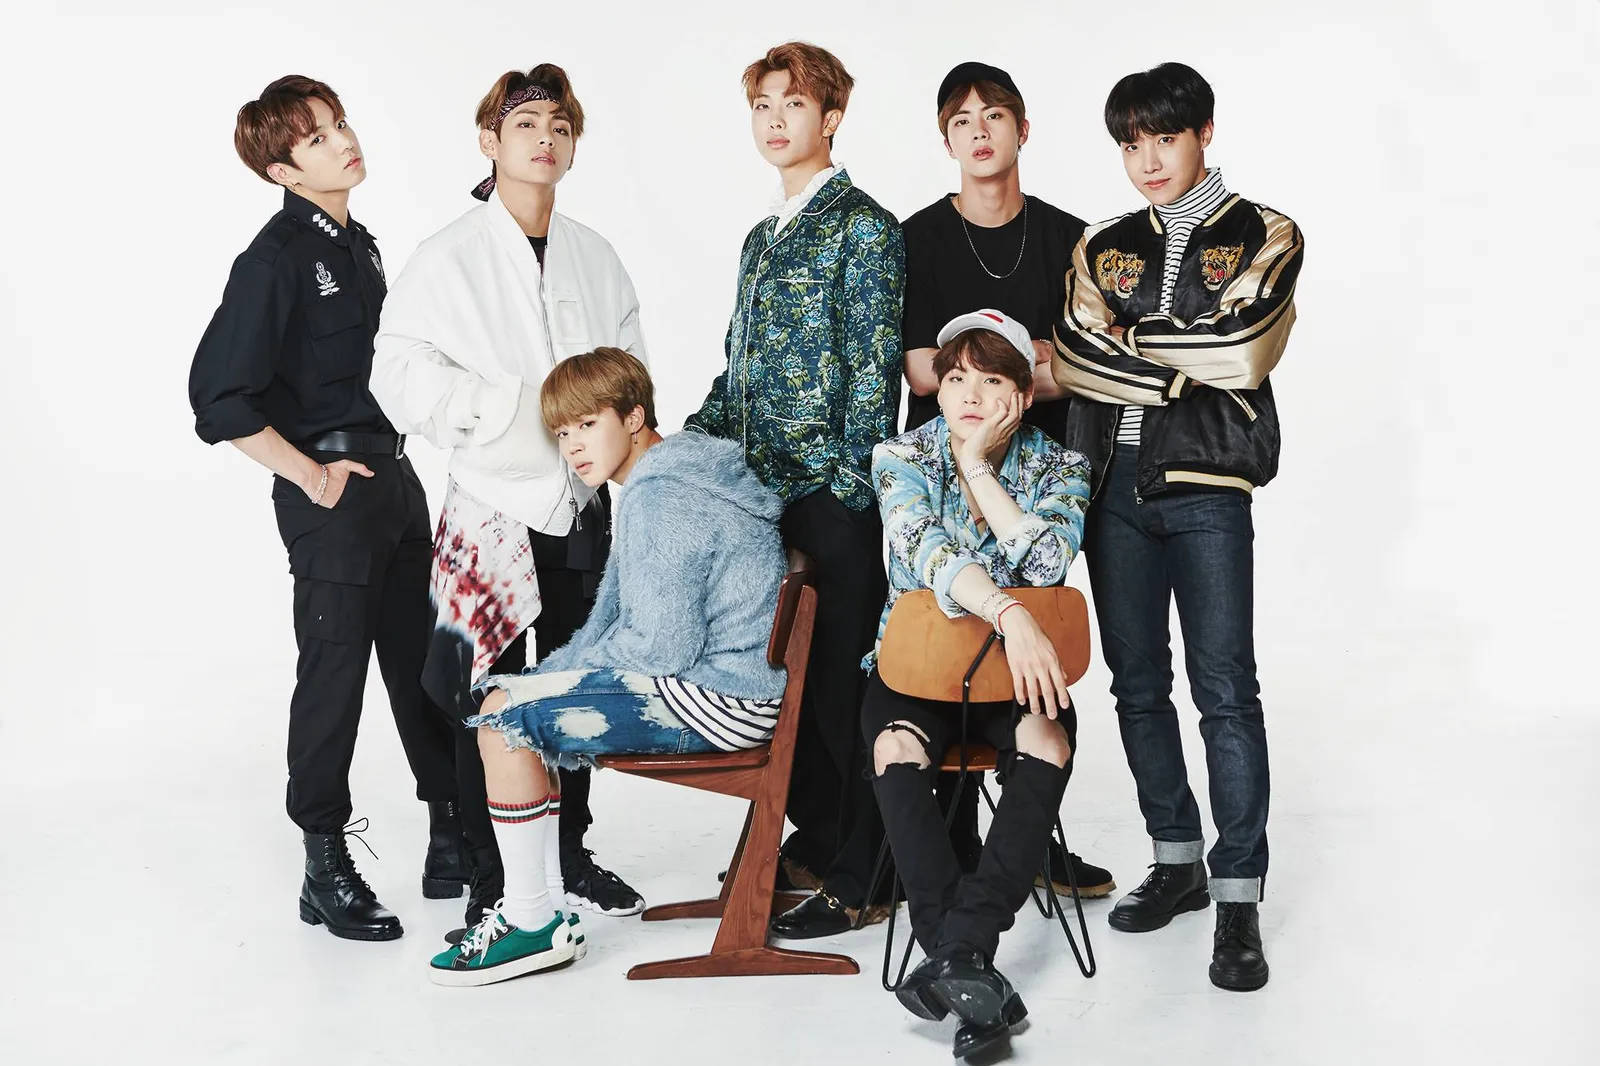 Cute Bts Group Posing Together On White Backdrop Background